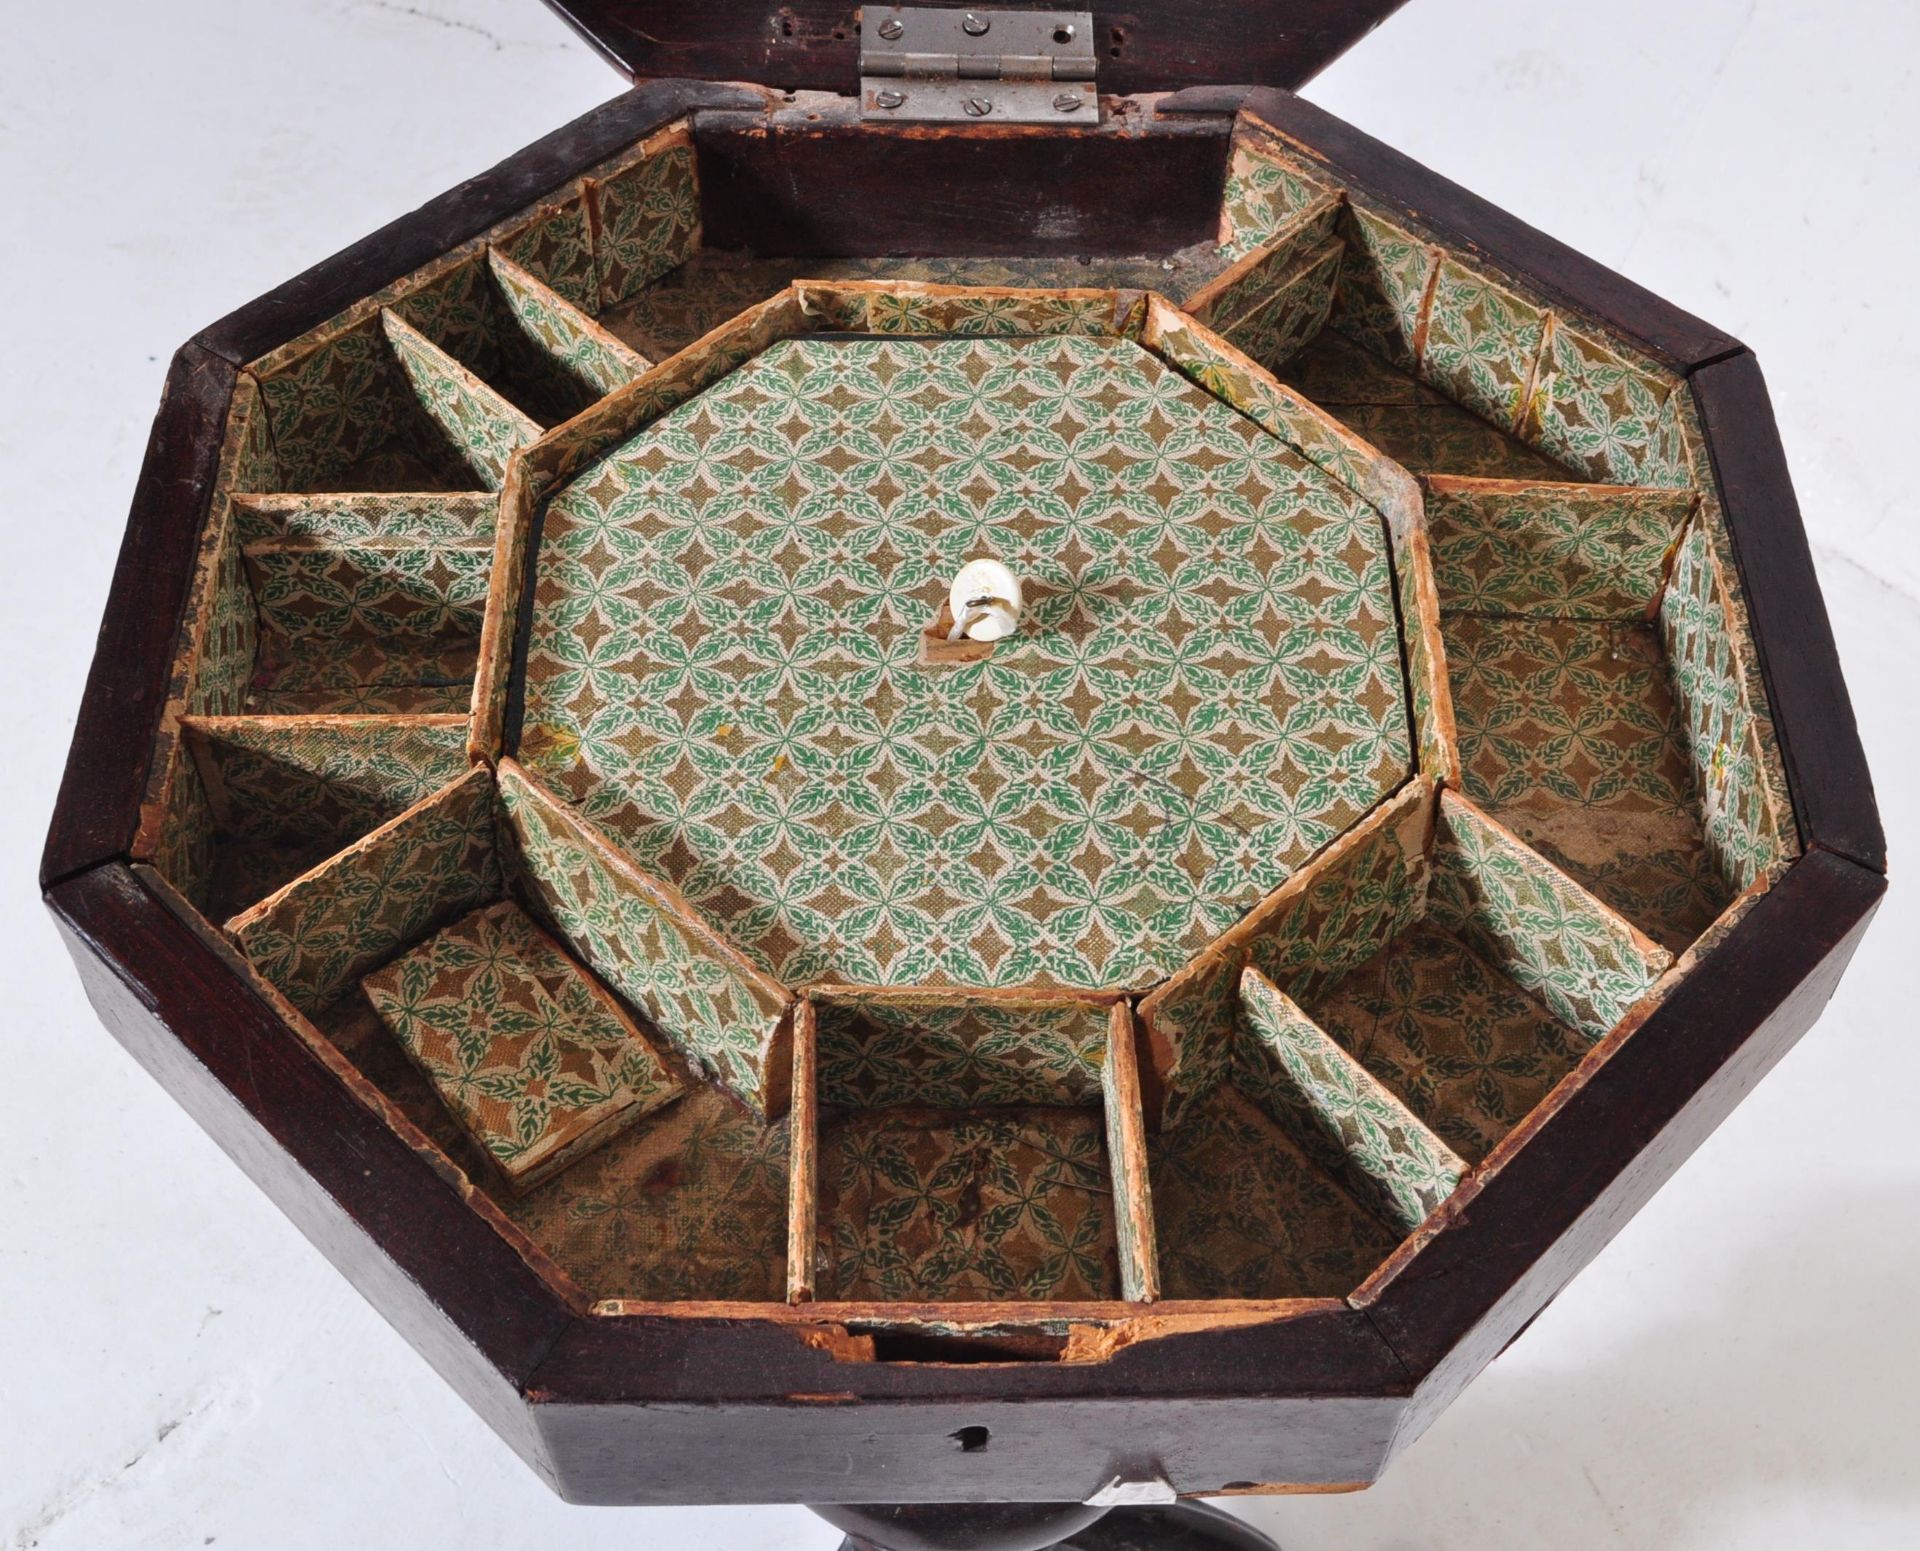 VICTORIAN 19TH CENTURY MARQUETRY INLAID WORK BOX TABLE - Image 4 of 7